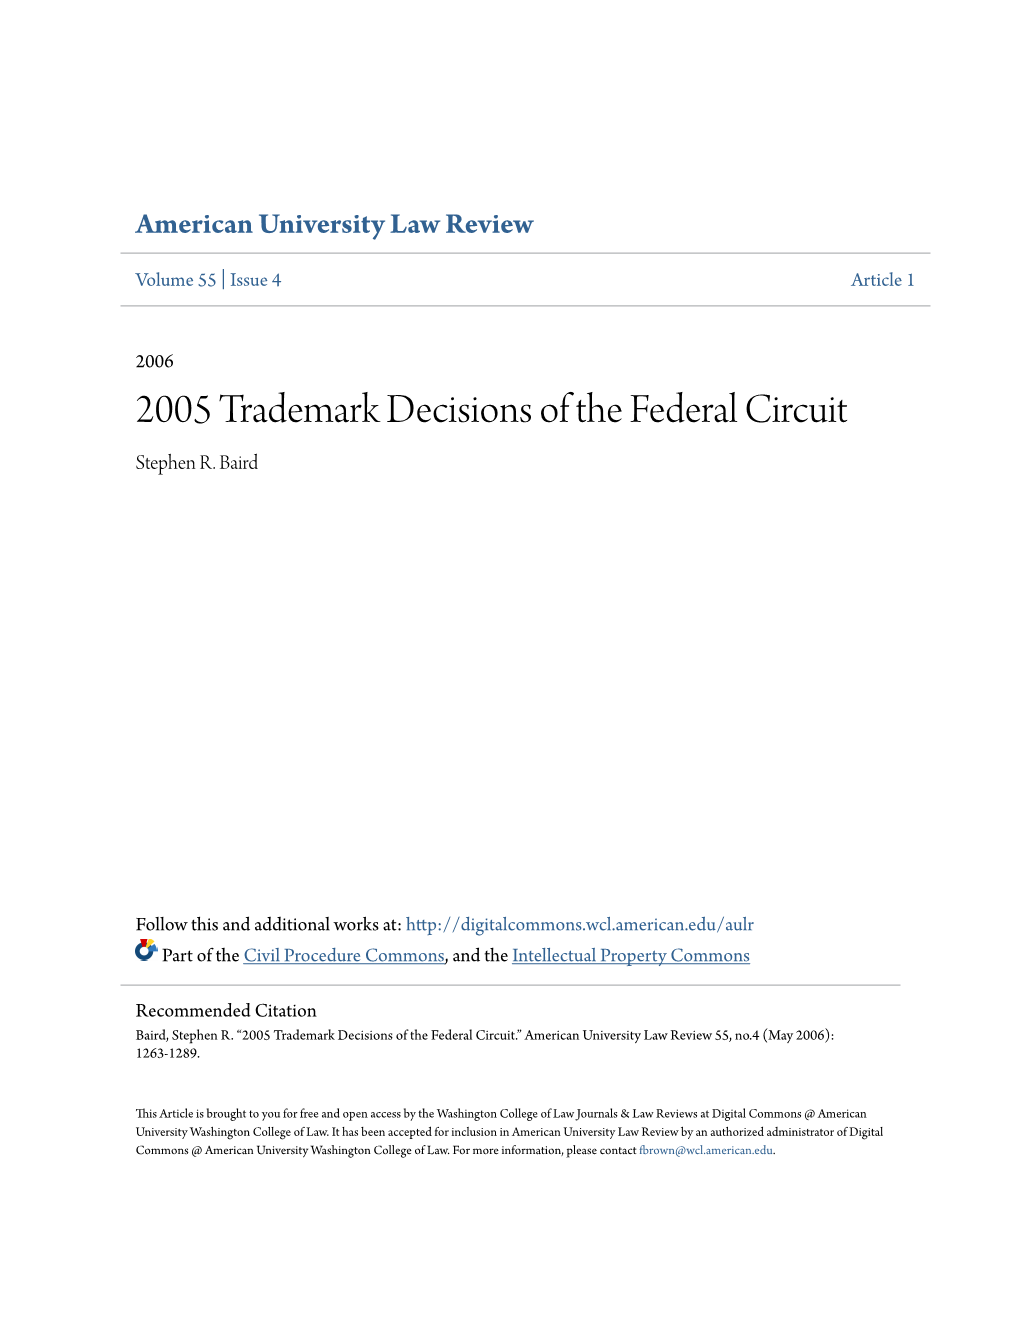 2005 Trademark Decisions of the Federal Circuit Stephen R